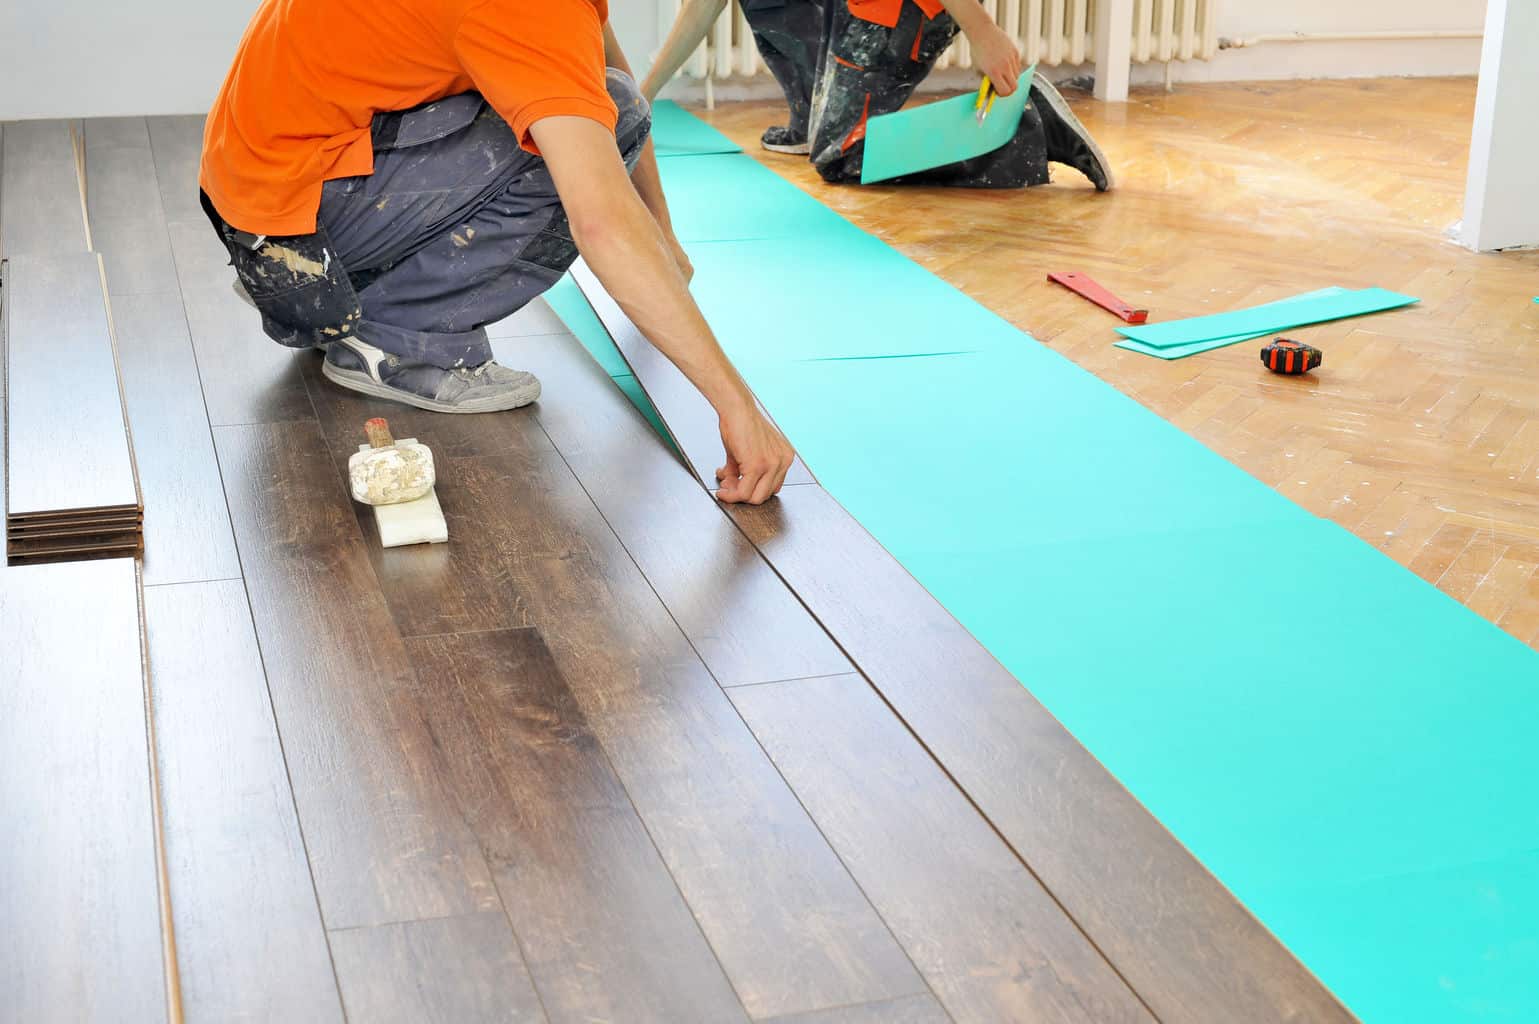 How To Lay Laminate Wood Floor 3 Errors To Avoid The Flooring Lady